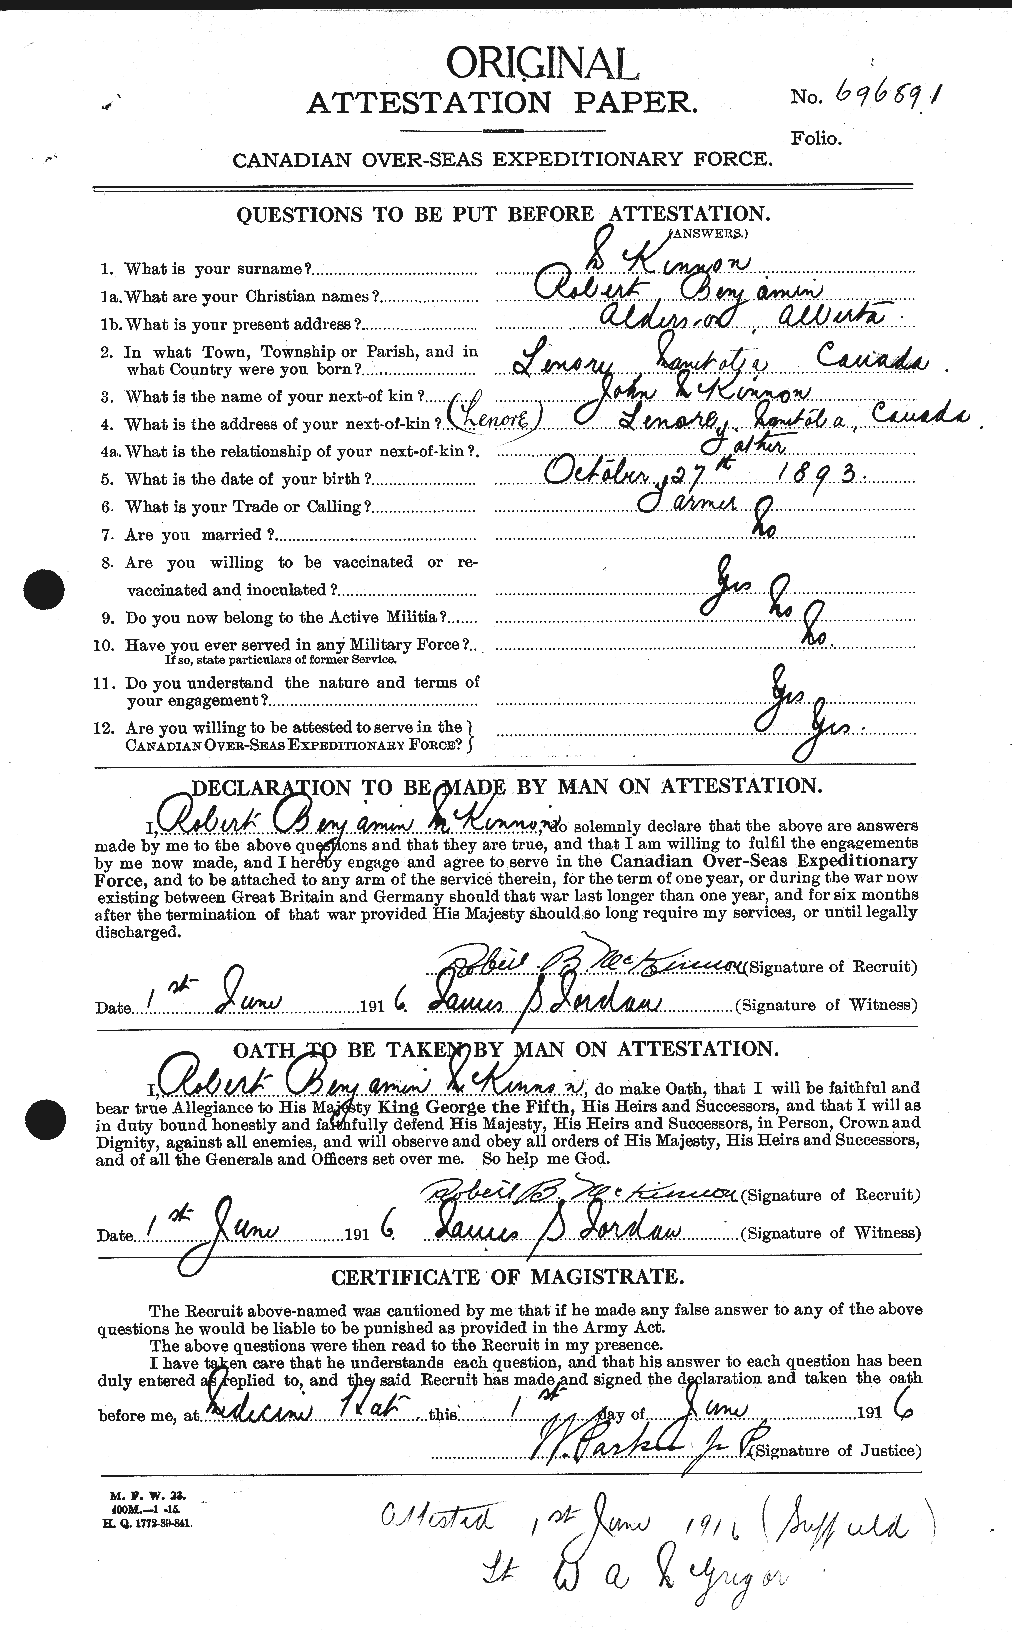 Personnel Records of the First World War - CEF 534243a